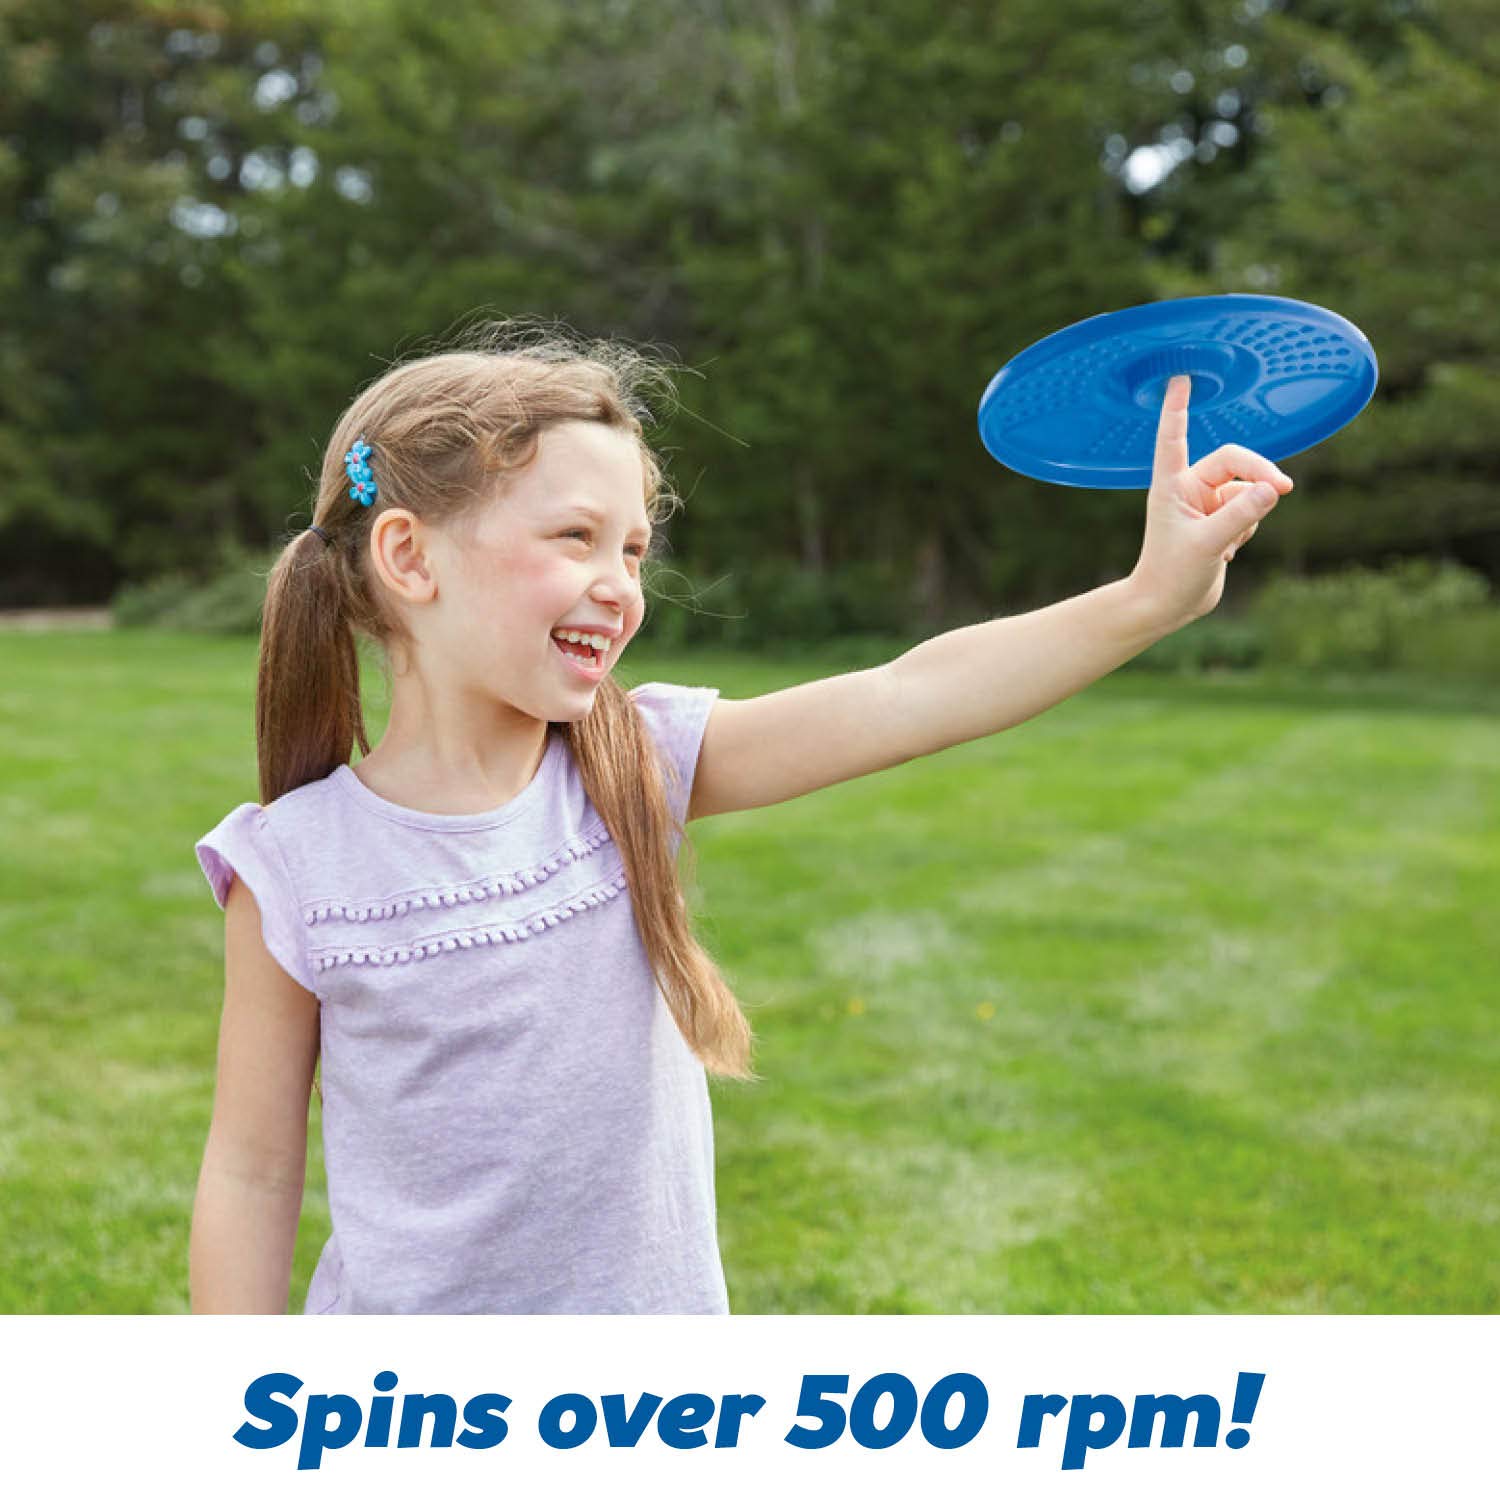 Kidoozie Fly n Spin Disc, Colors Vary, Promotes Outdoor Play, for Children Ages 5 and up, Multi